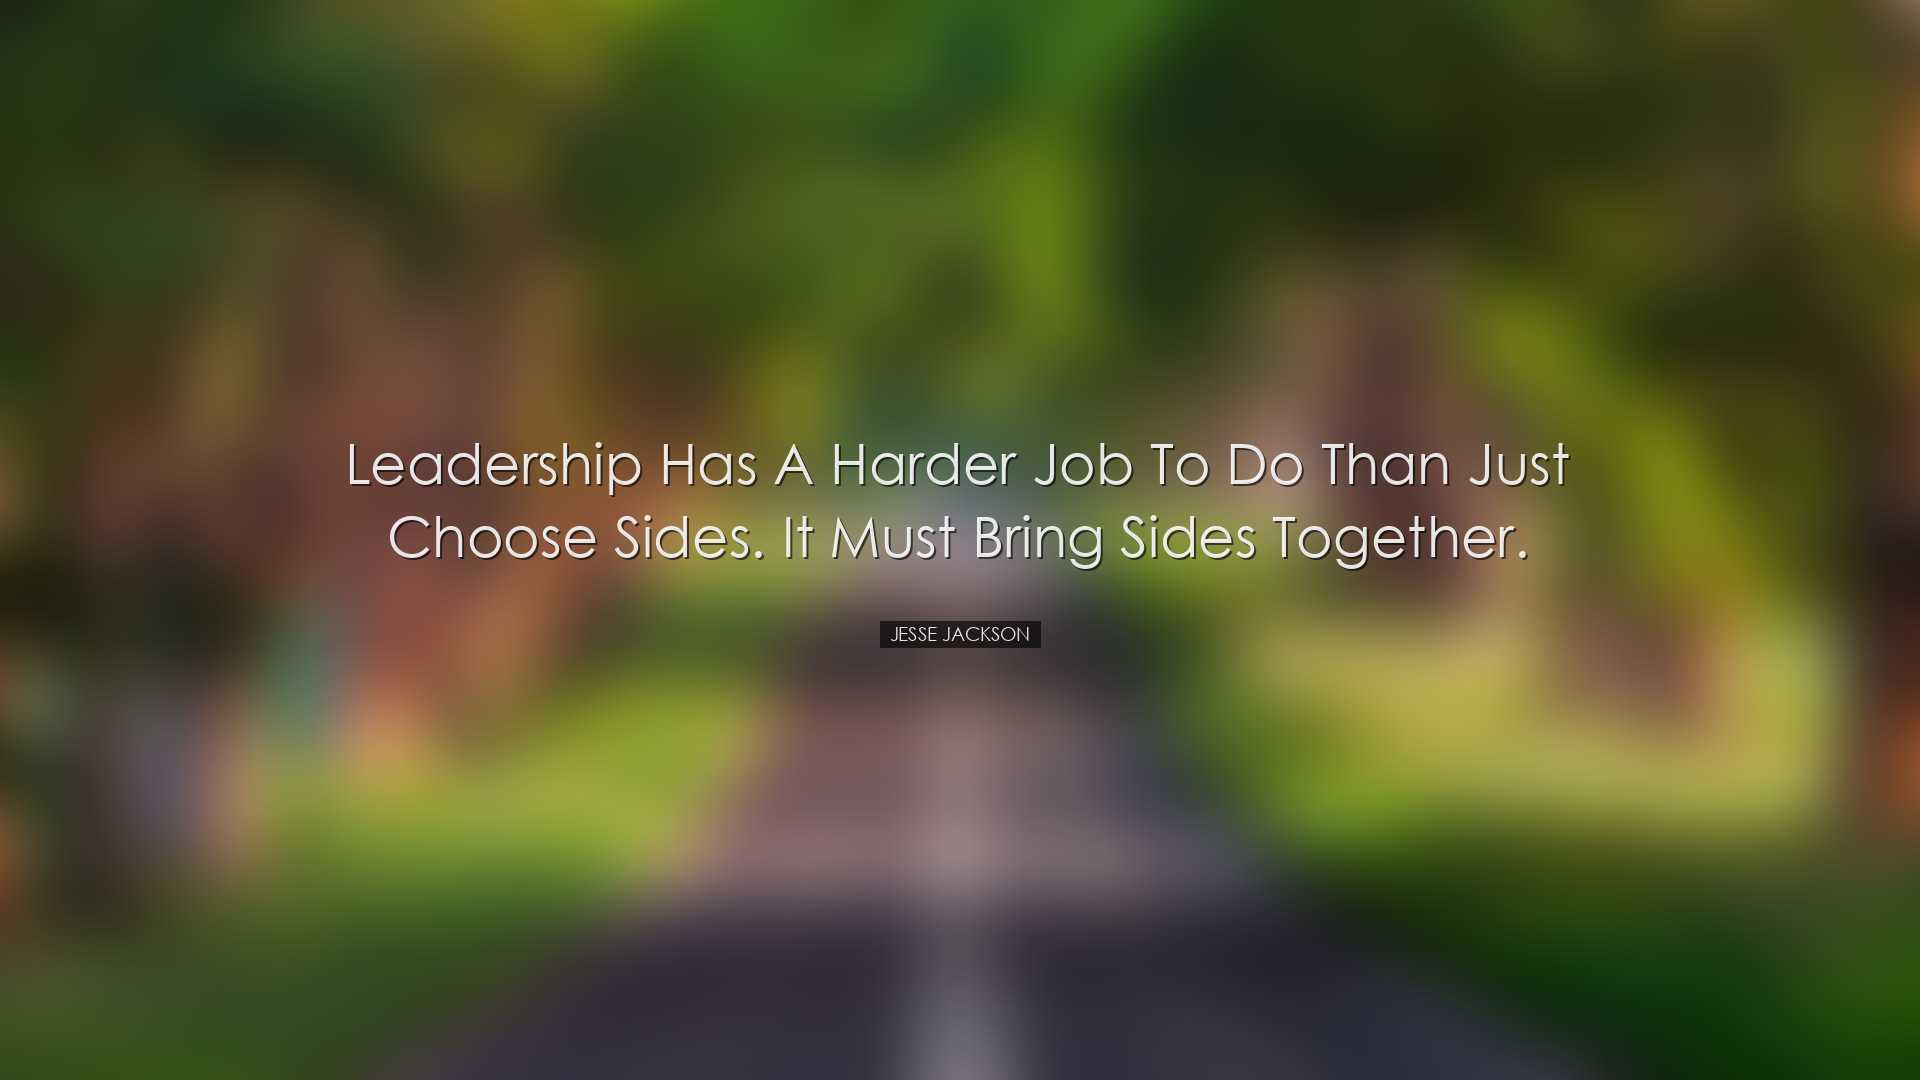 Leadership has a harder job to do than just choose sides. It must